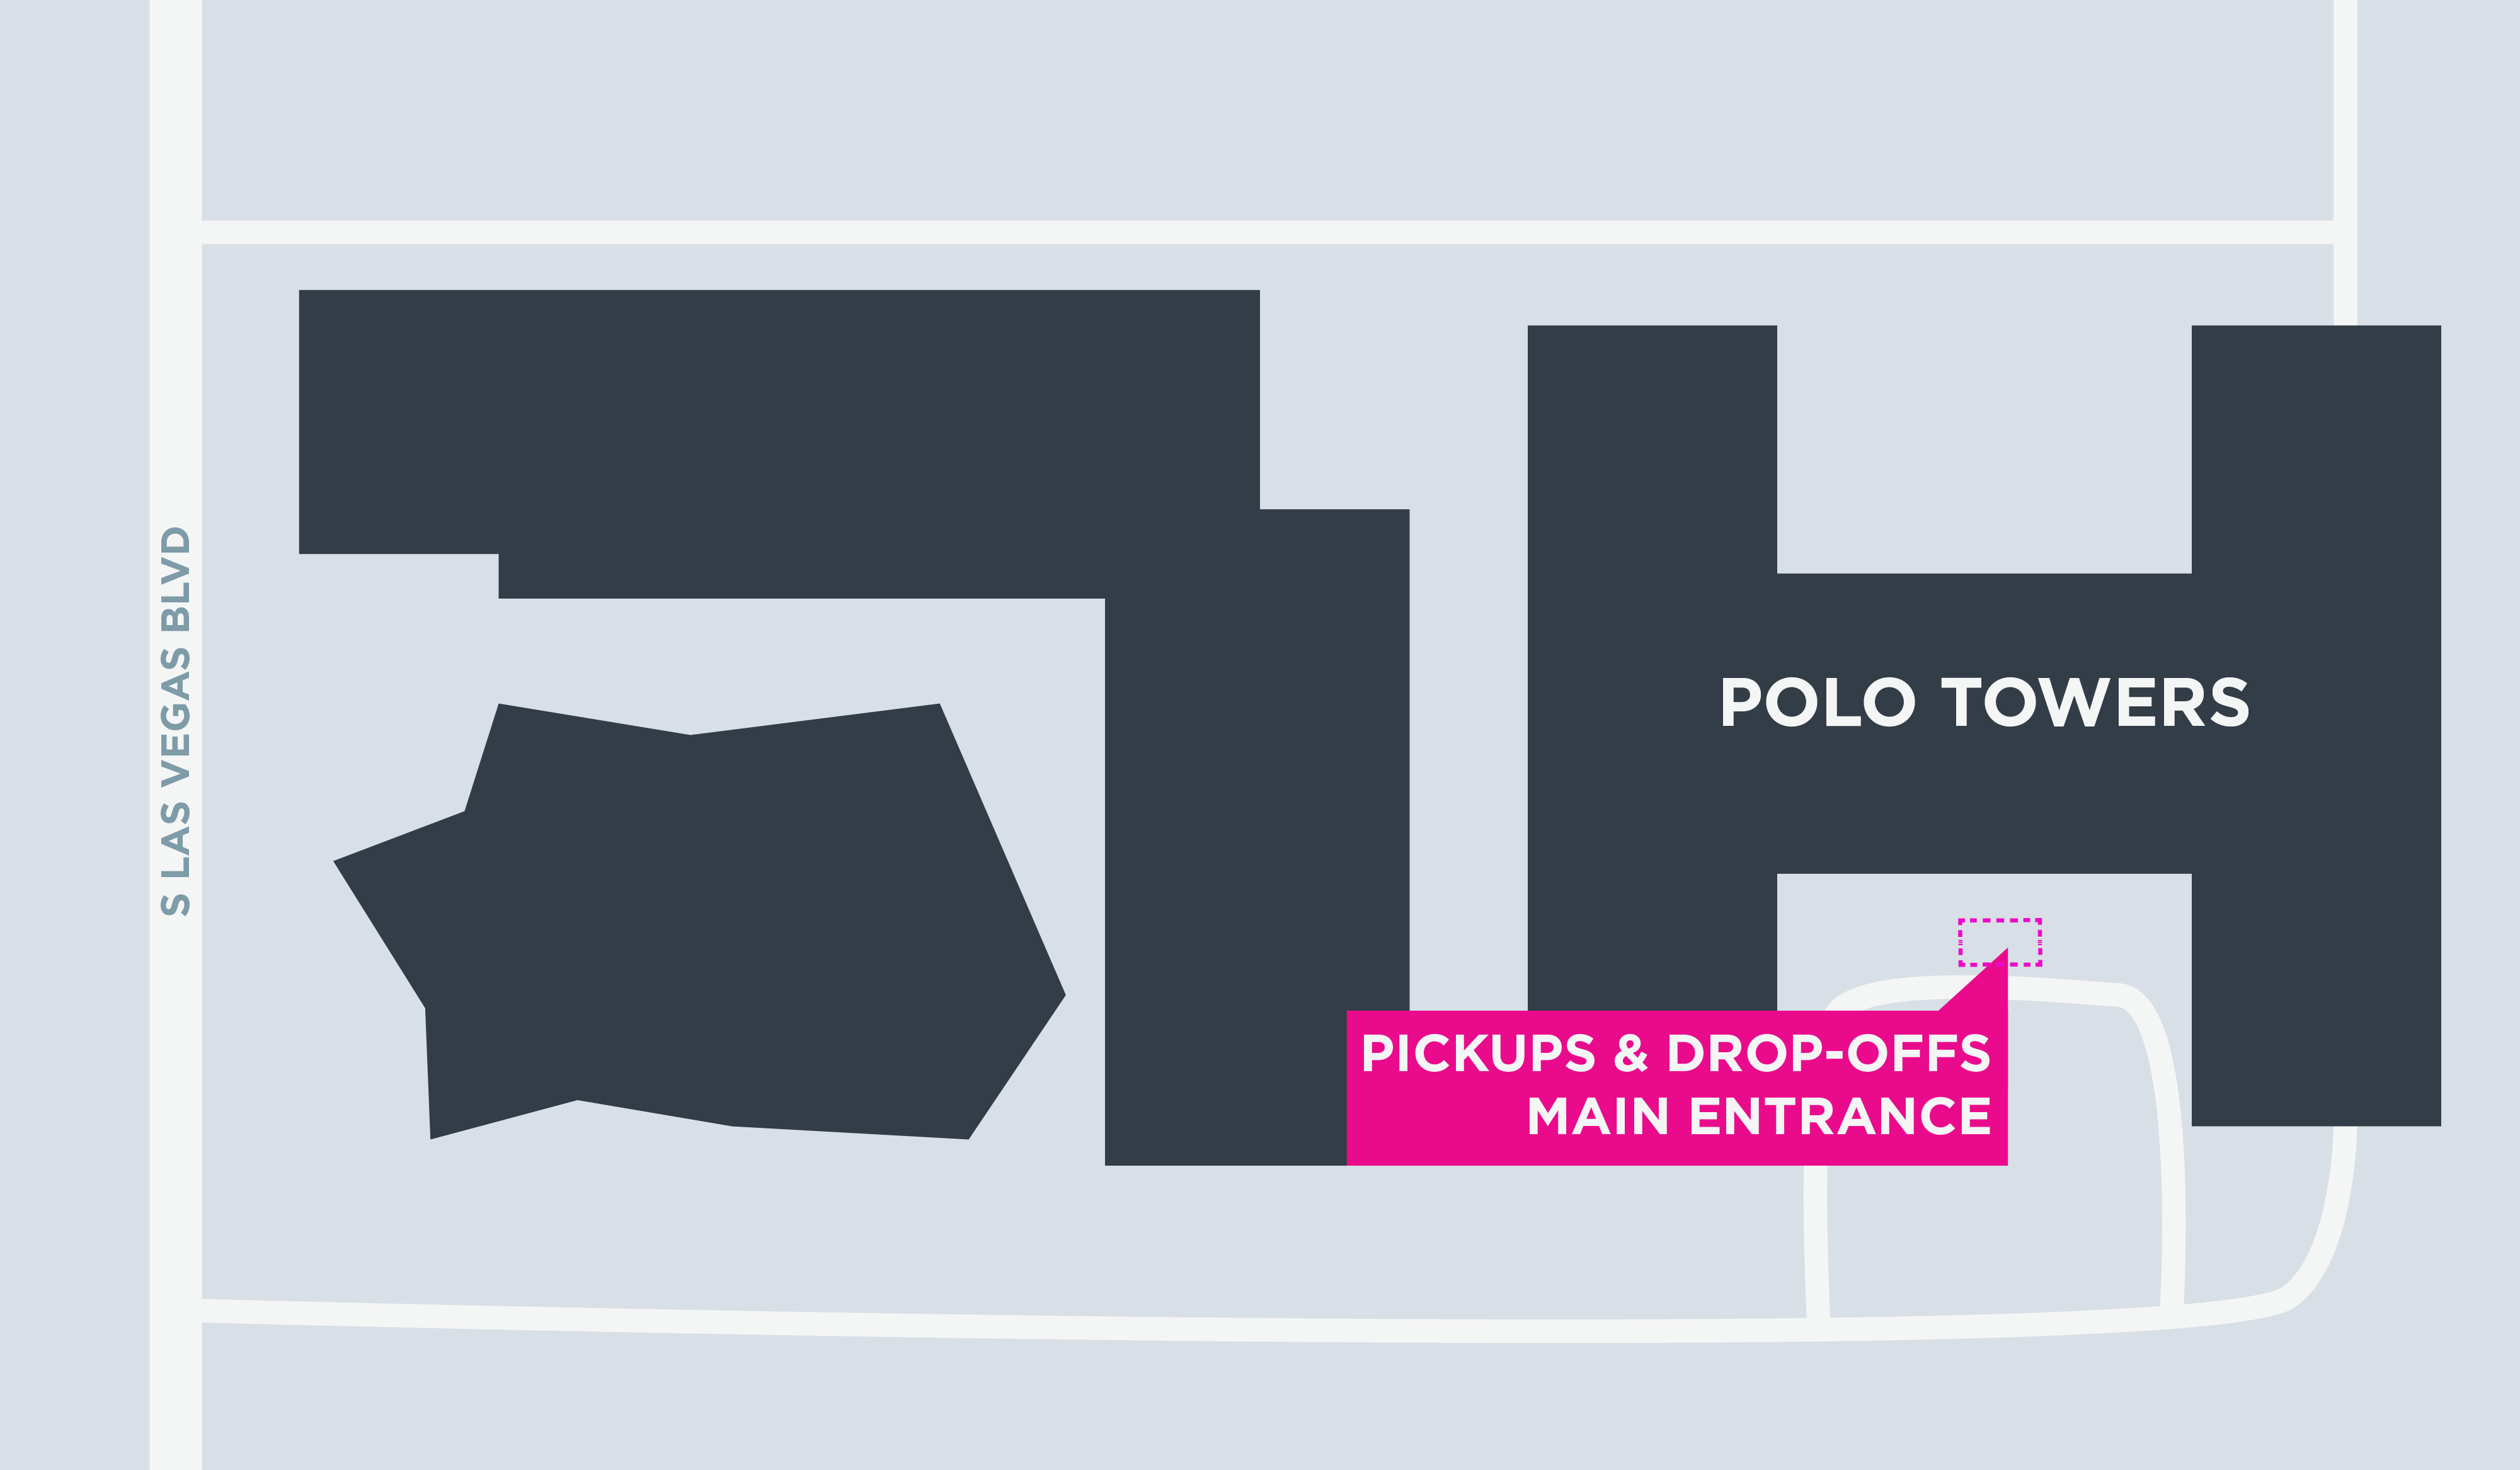 Map of the pickup and drop-offs area at the Polo Towers in Las Vegas.